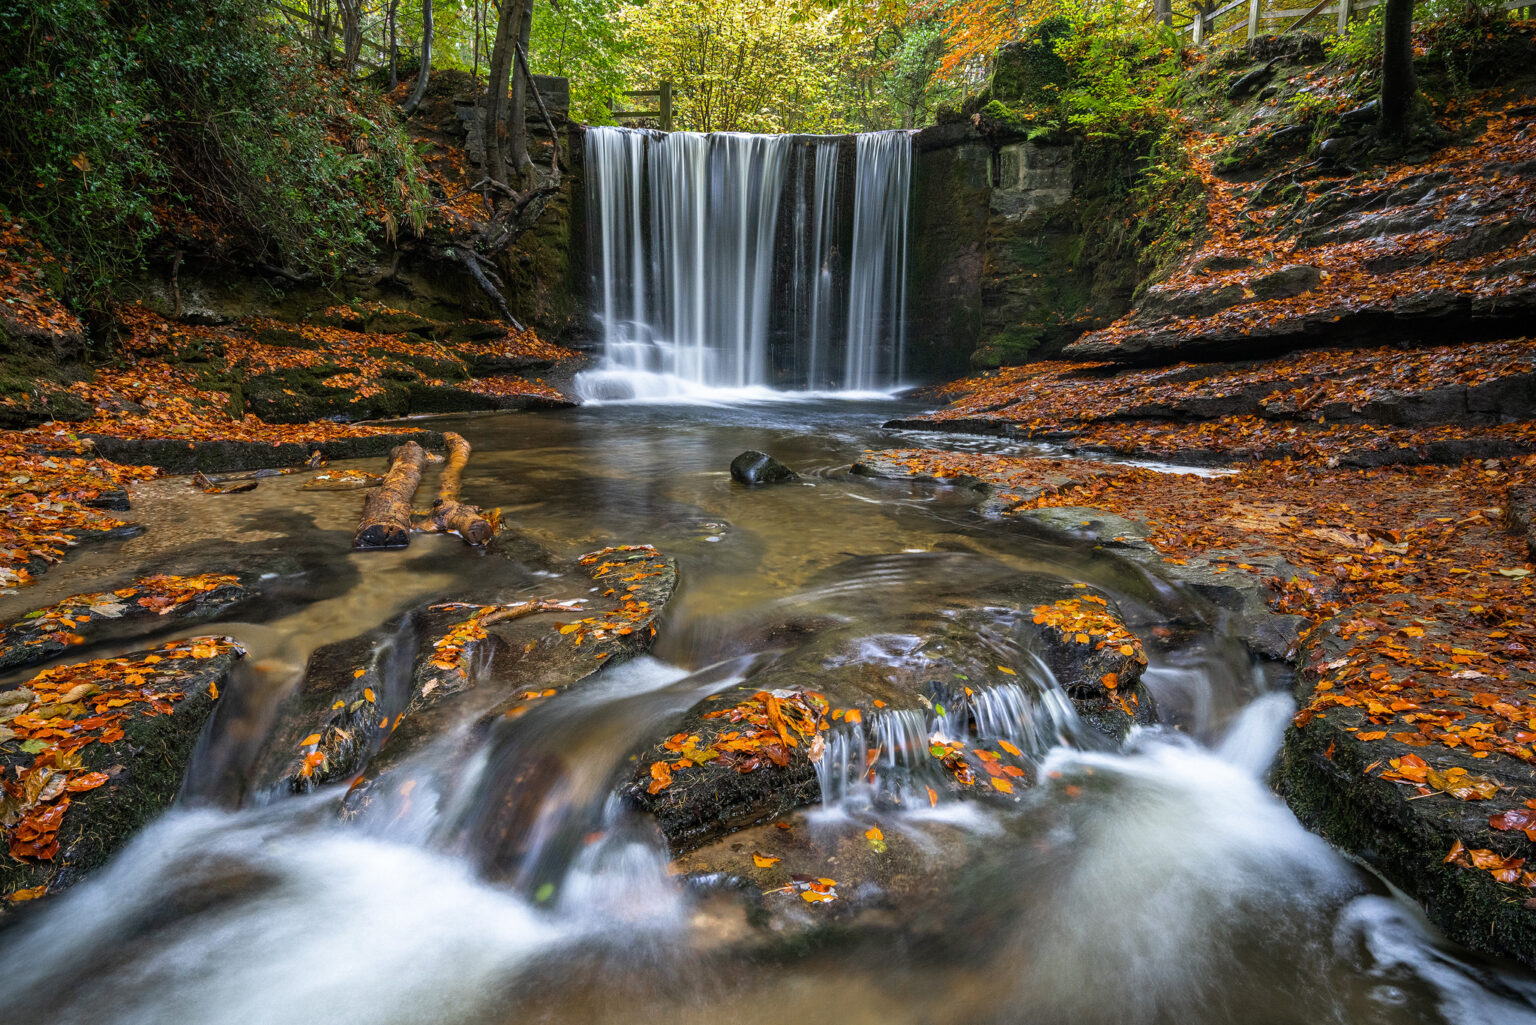 Nant Mill Autumn Waterfall - Wales Landscape Photography